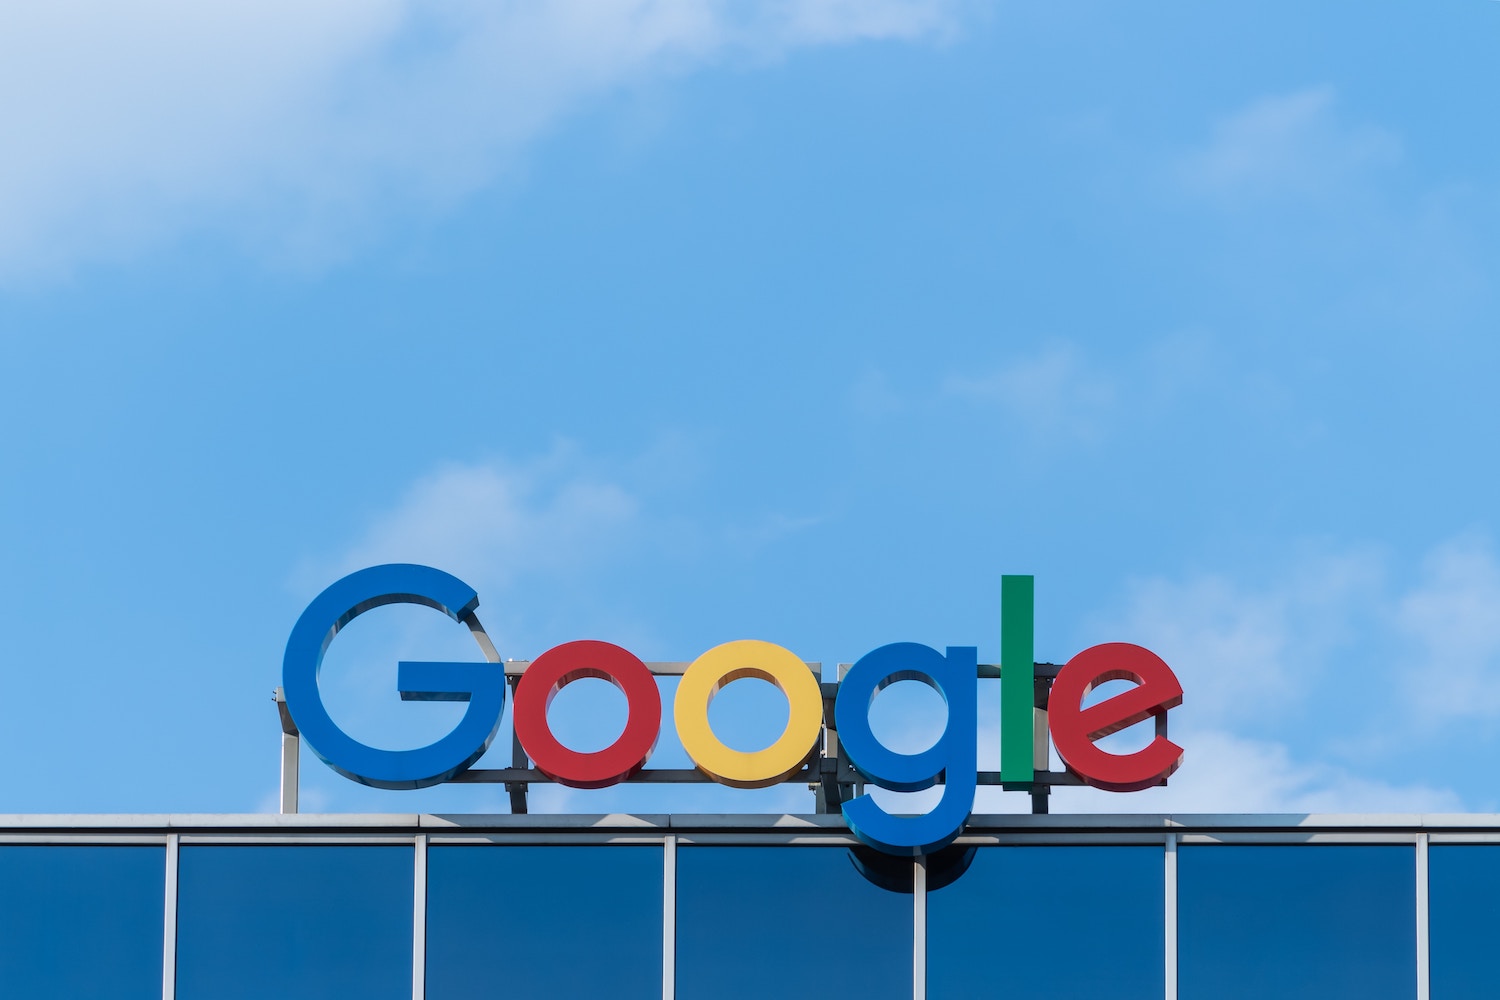 Google to return to China? Leaked US docs say so but Chinese authorities deny